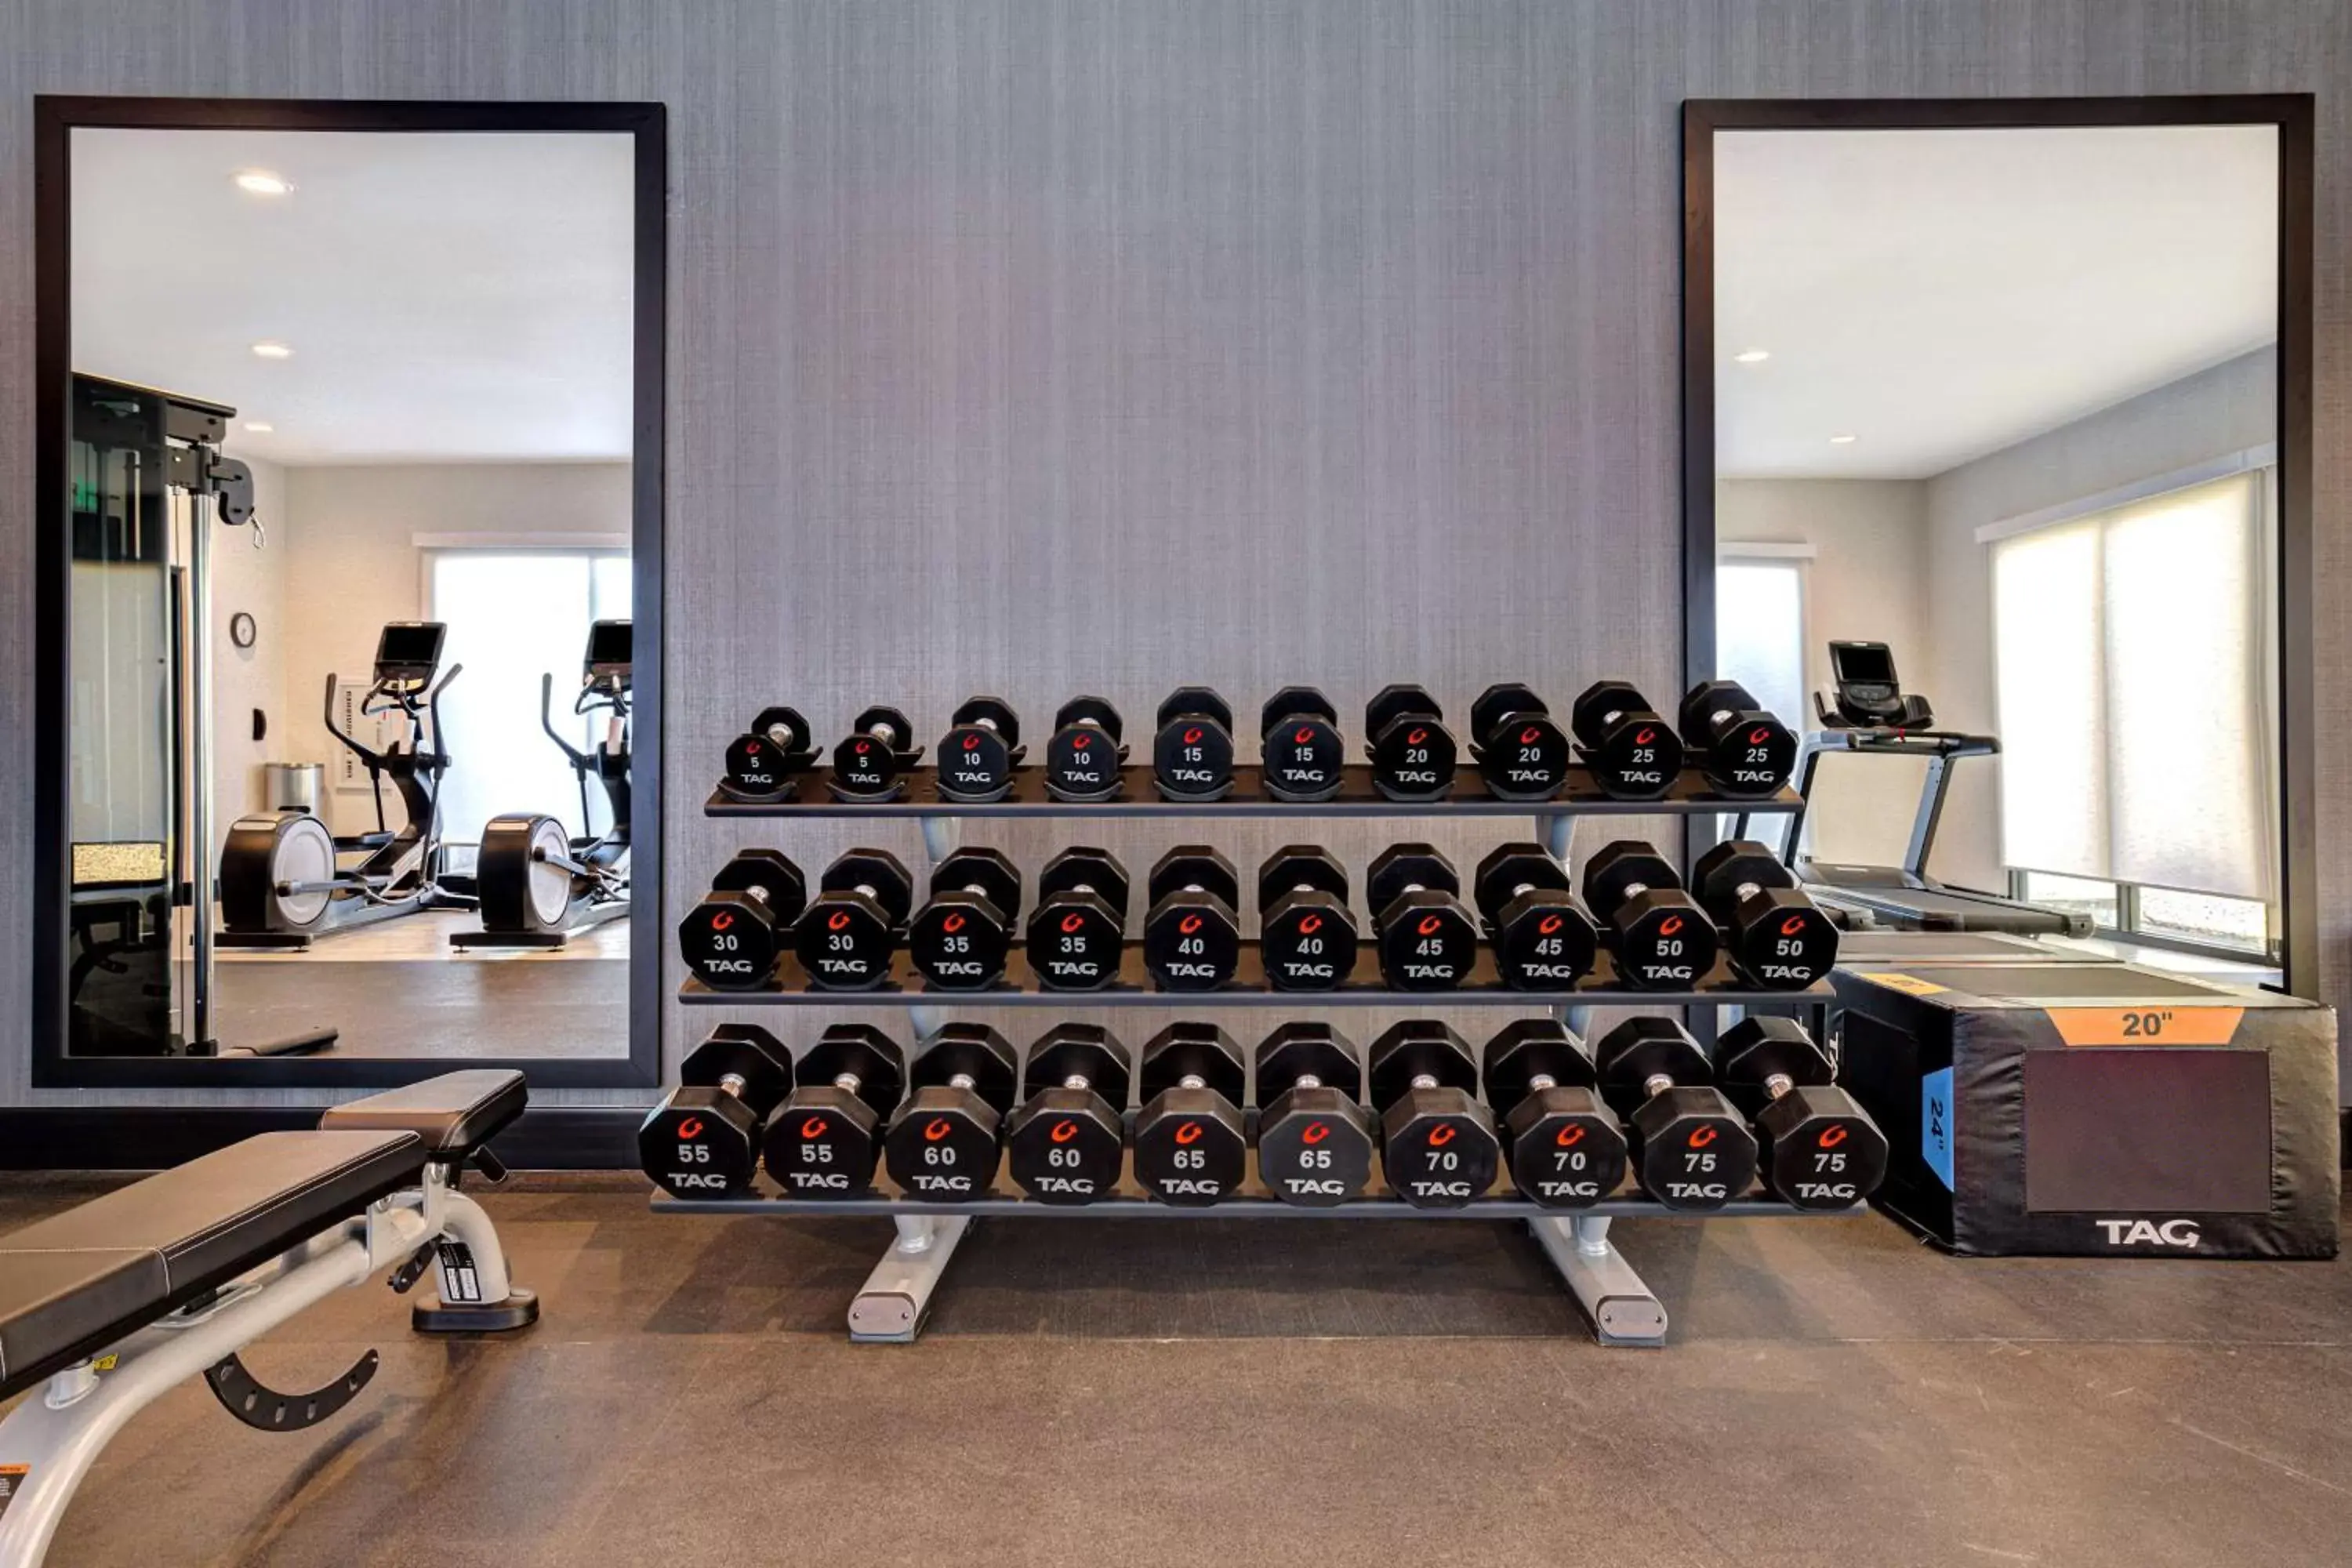 Fitness centre/facilities, Fitness Center/Facilities in Doubletree By Hilton Palmdale, Ca